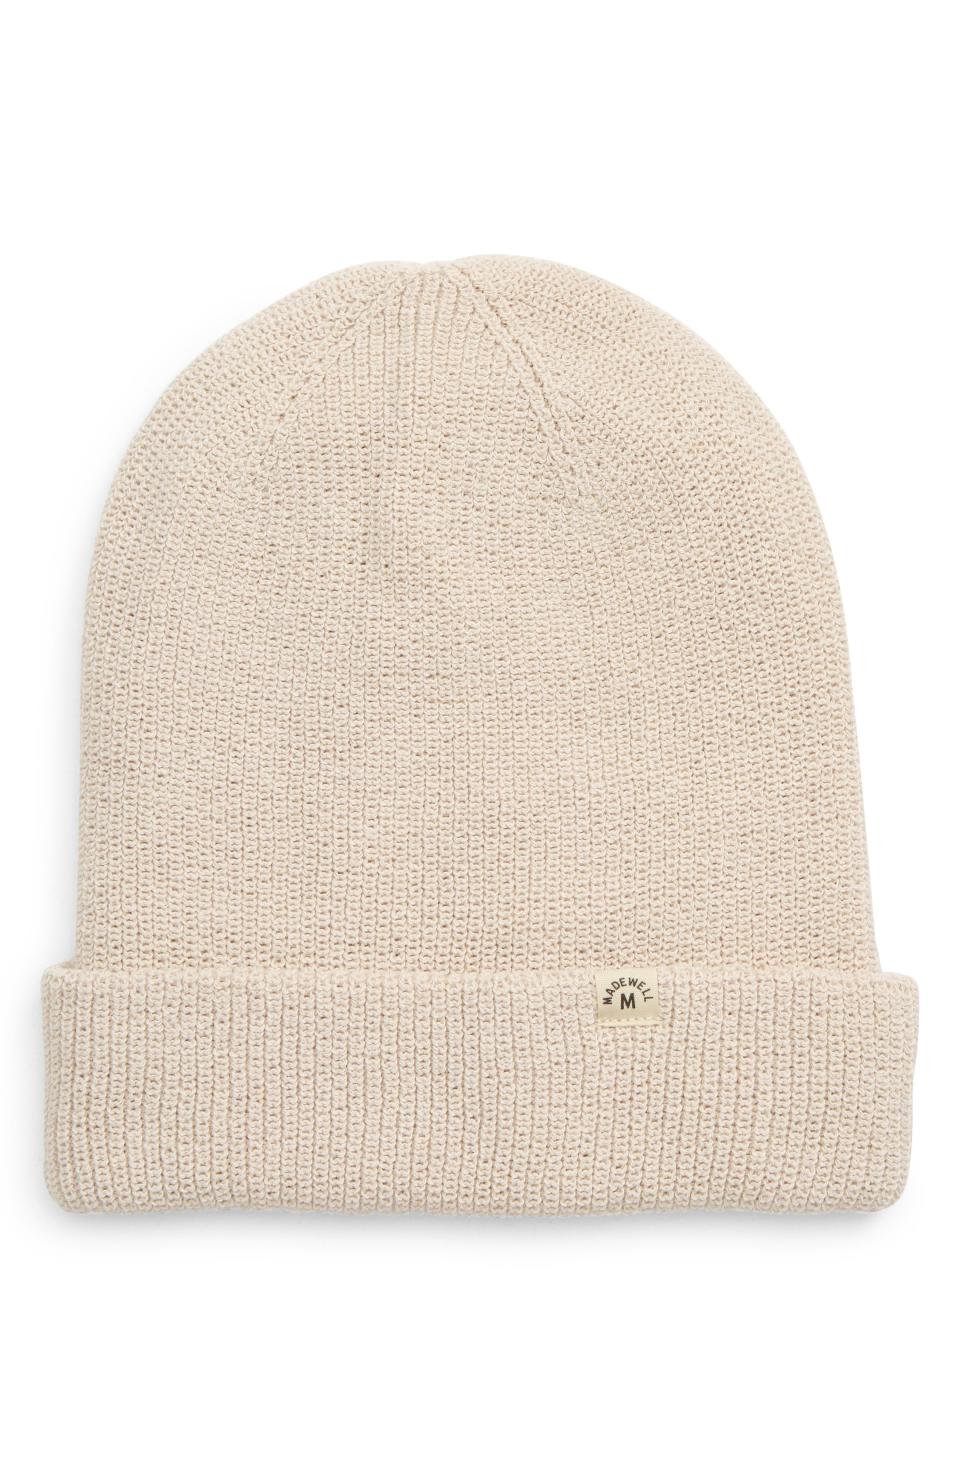 22) Recycled Cotton Beanie